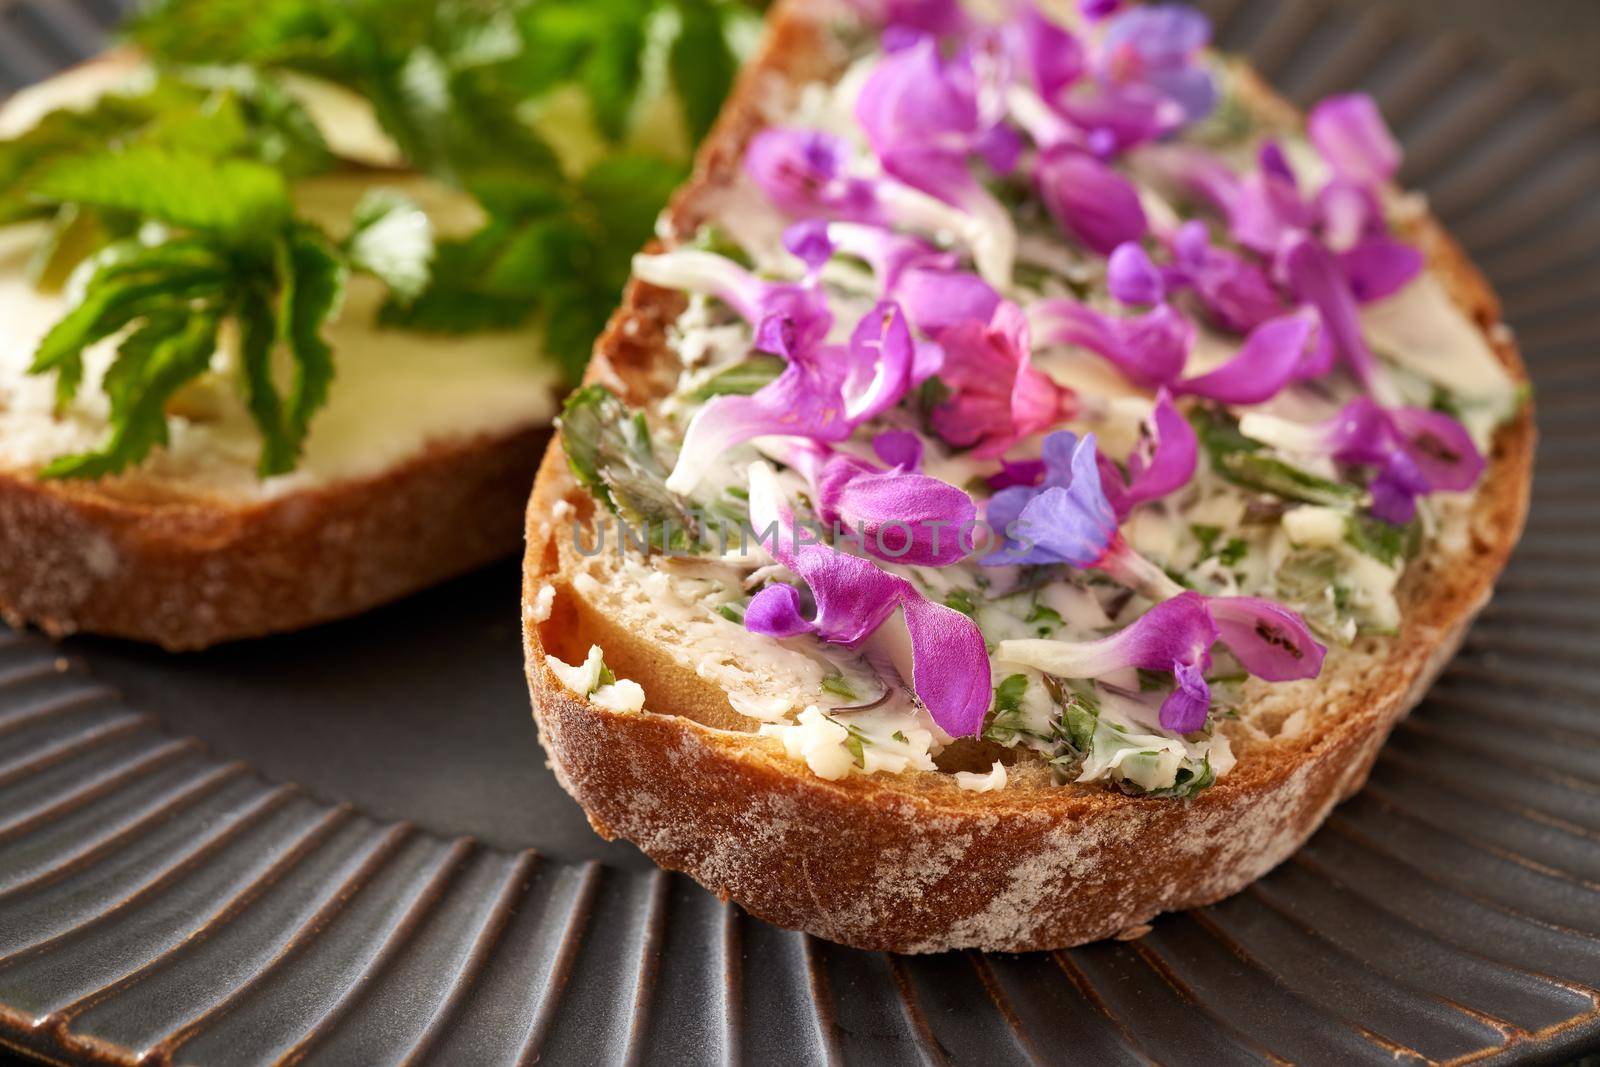 A slice of sourdough bread with butter and purple dead-nettle and lungwort flowers, with ground elder leaves in the background